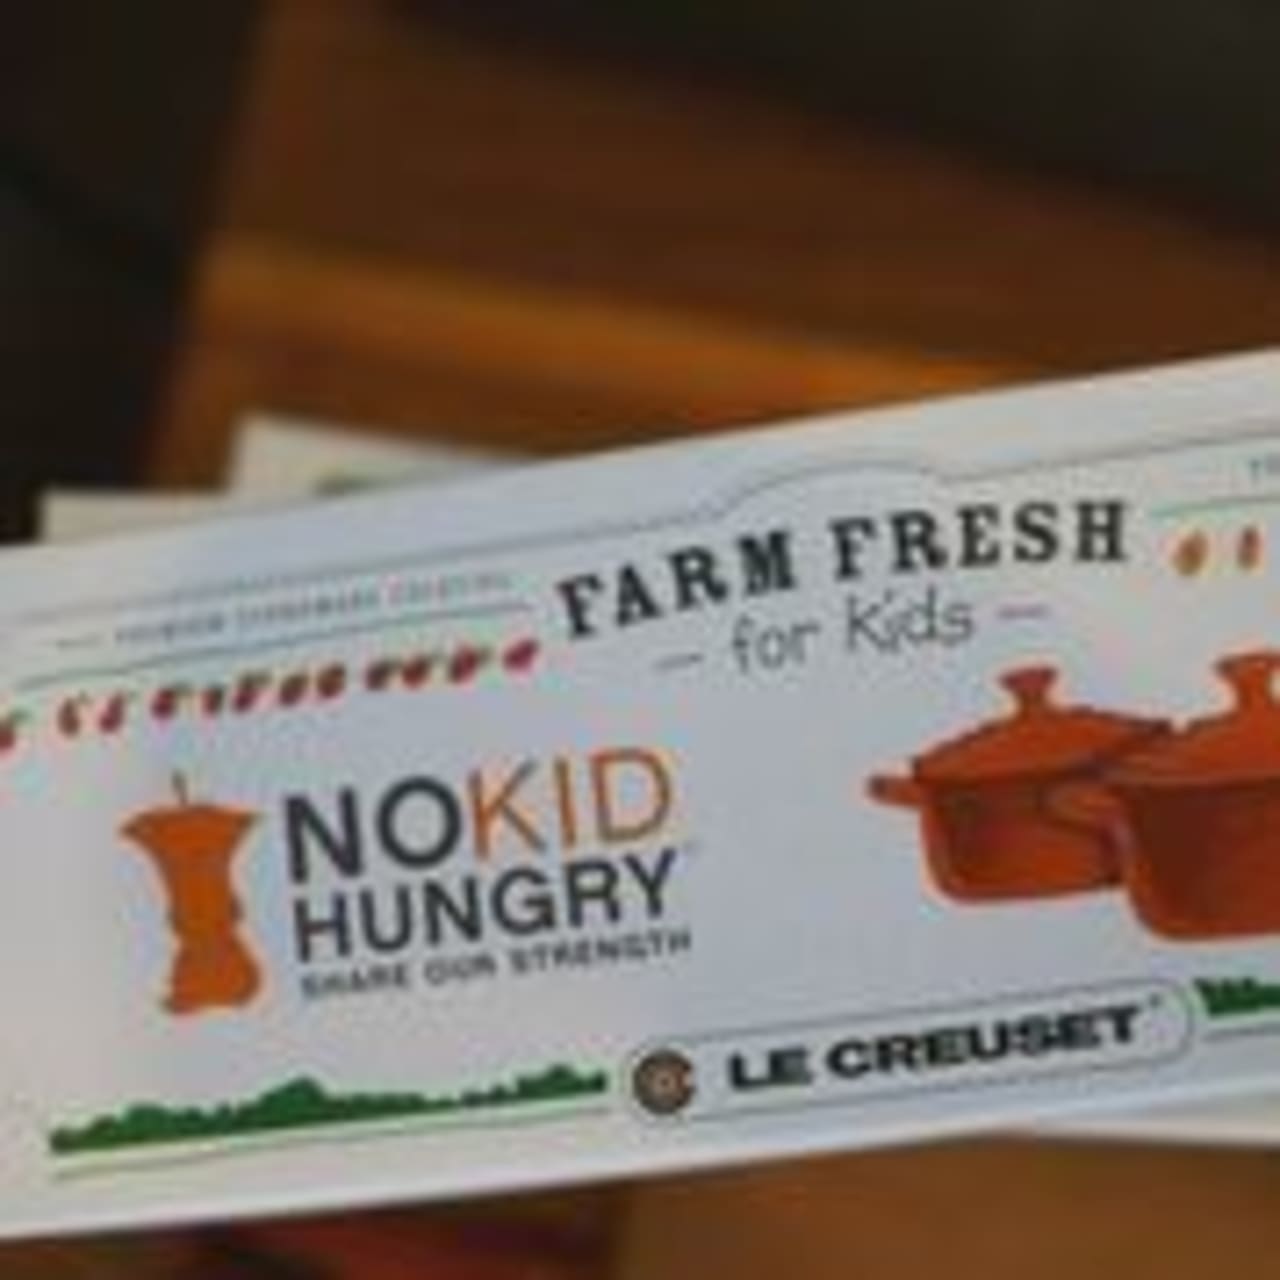 The No Kid Hungry dinner was a success.